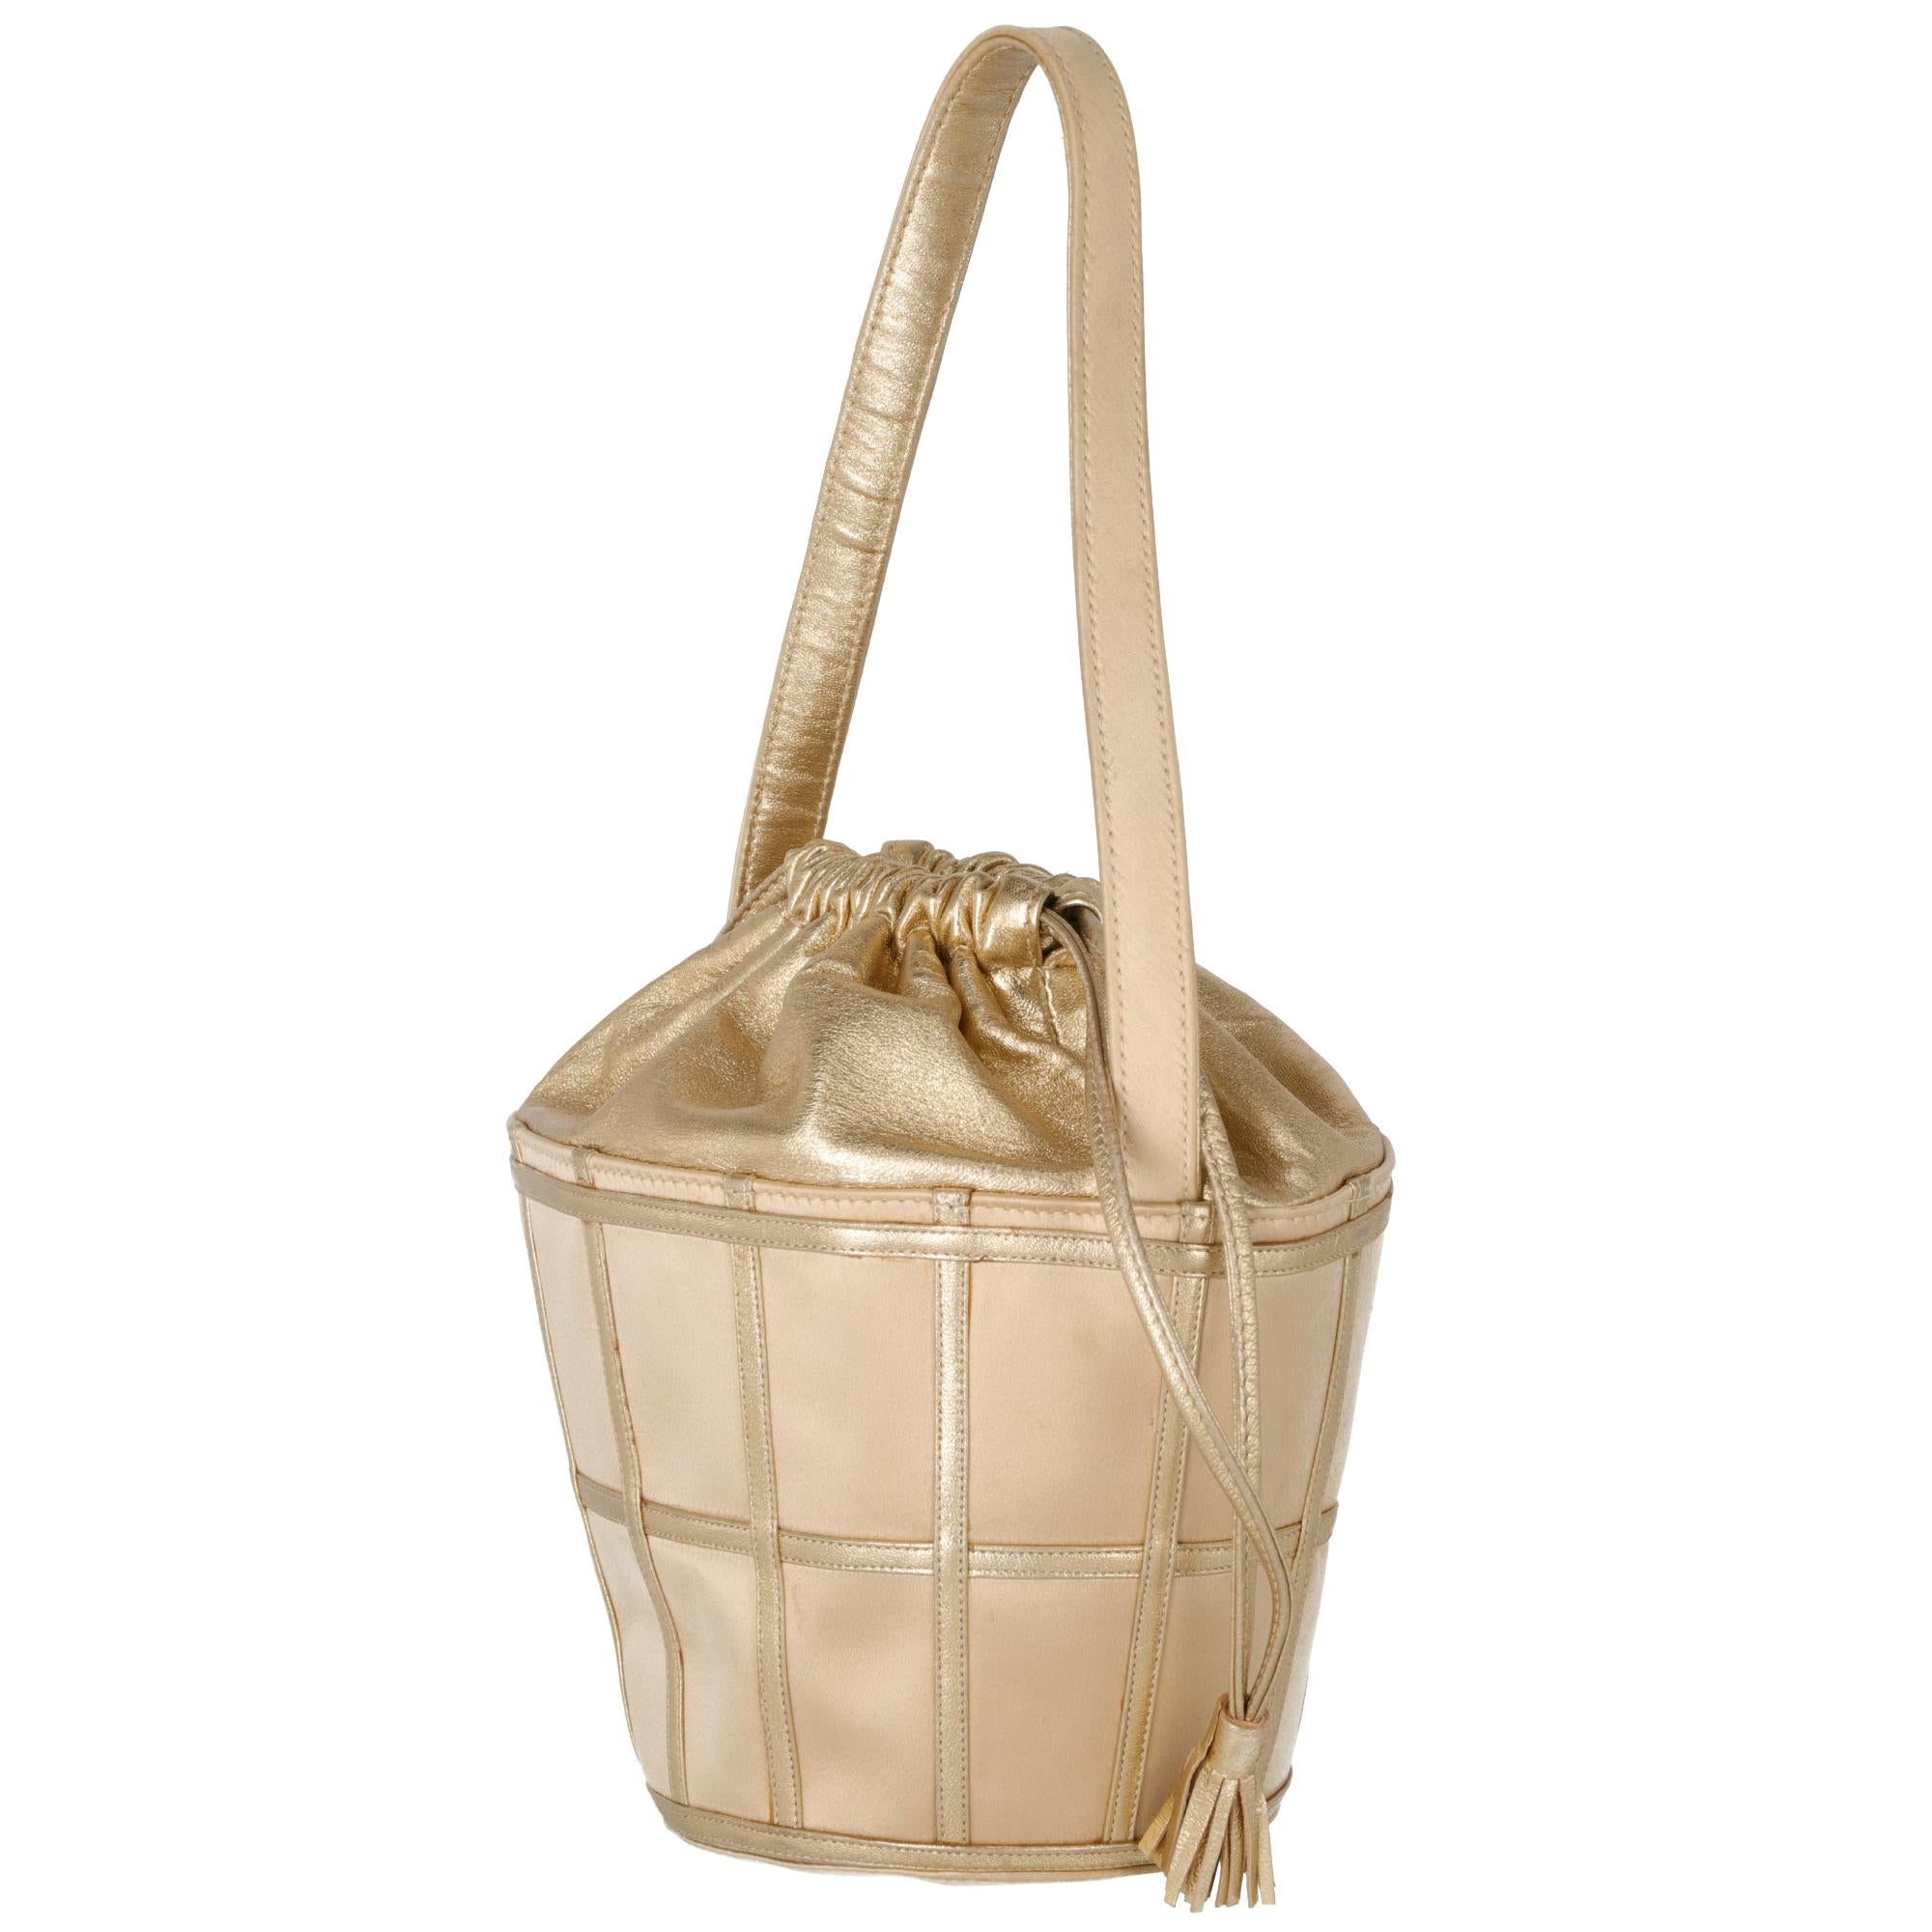 Rene Caovilla gold bucket bag, with decorative leather inserts, short handle, inner bag in soft leather and drawstring closure with two small tassels on the ends. Lined with internal patch pocket.

The item shows slight signs of wear on the skin and